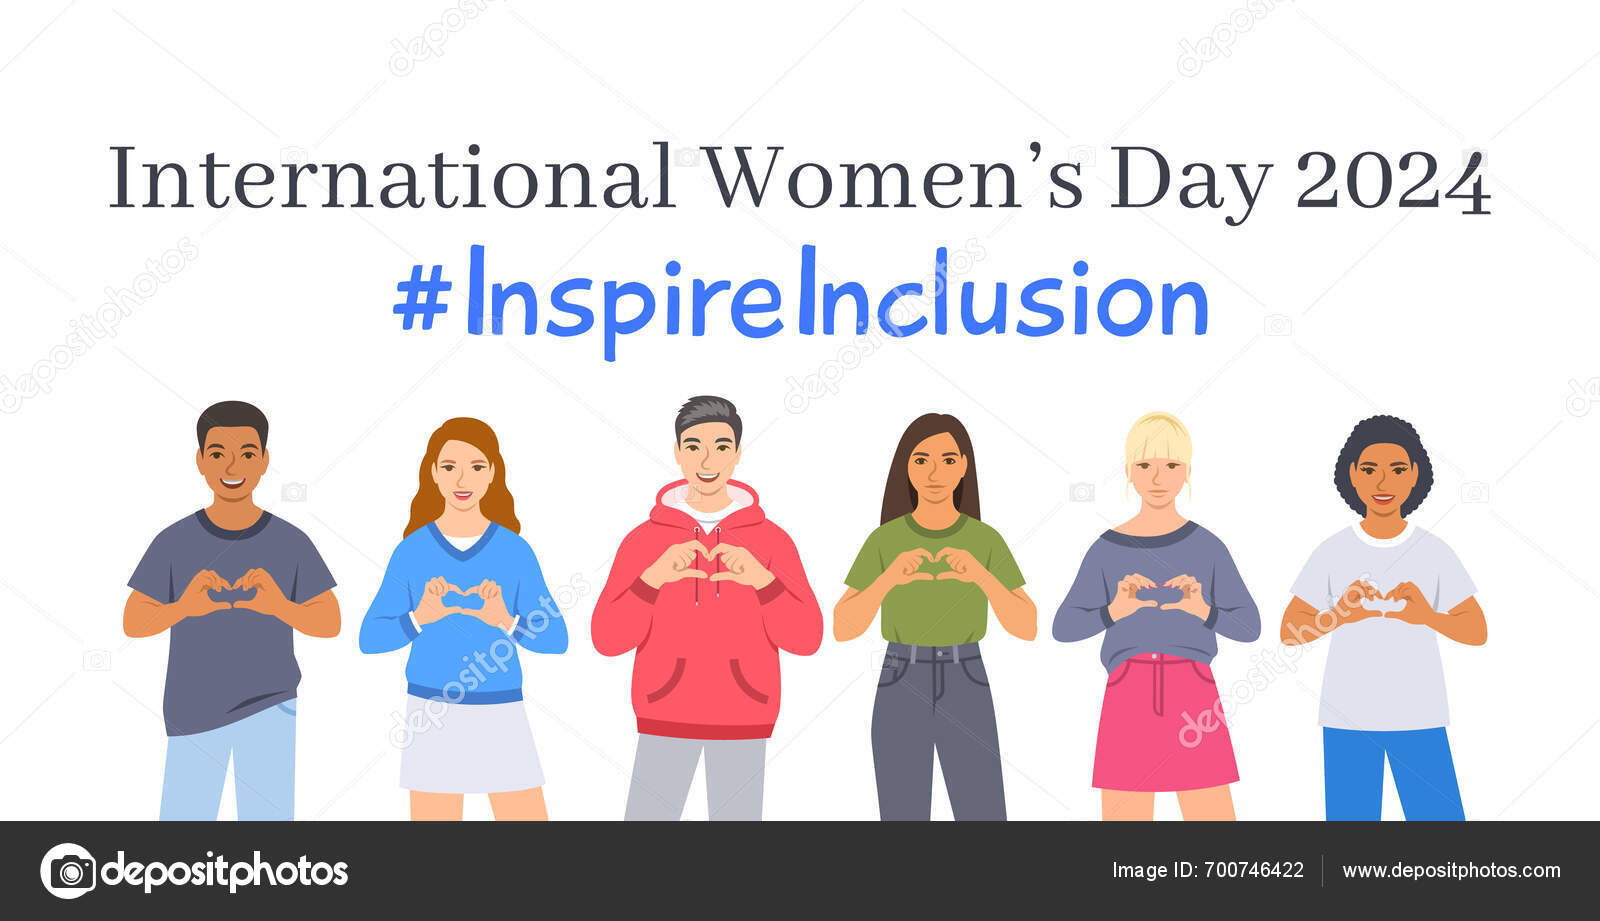 Inspire Inclusion Campaign Pose International Women's Day 2024 Theme